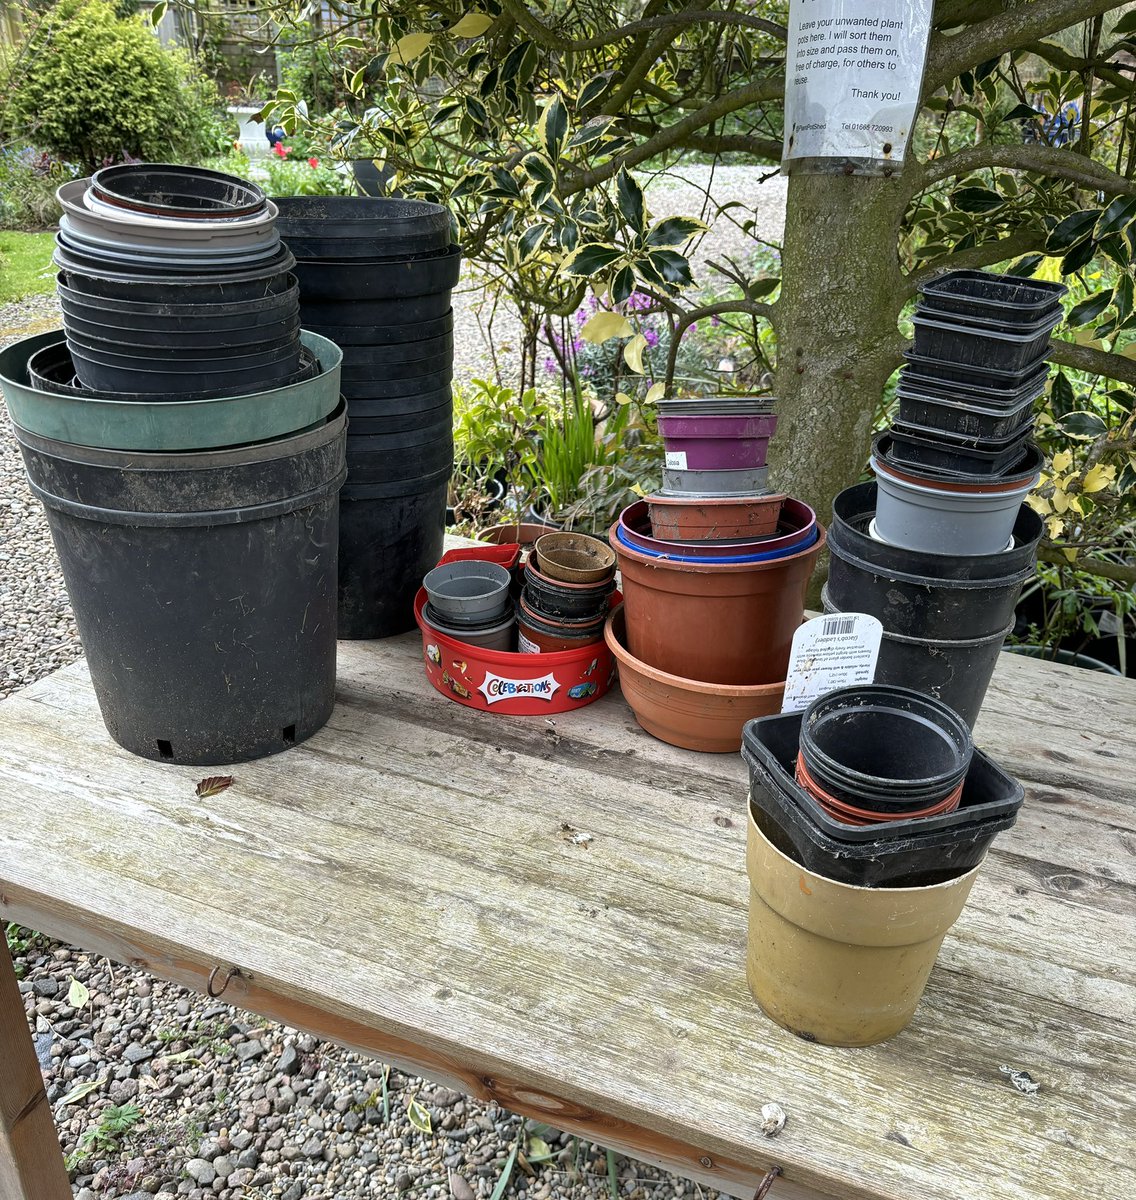 99 assorted pots appeared whilst I was out. Thank you.